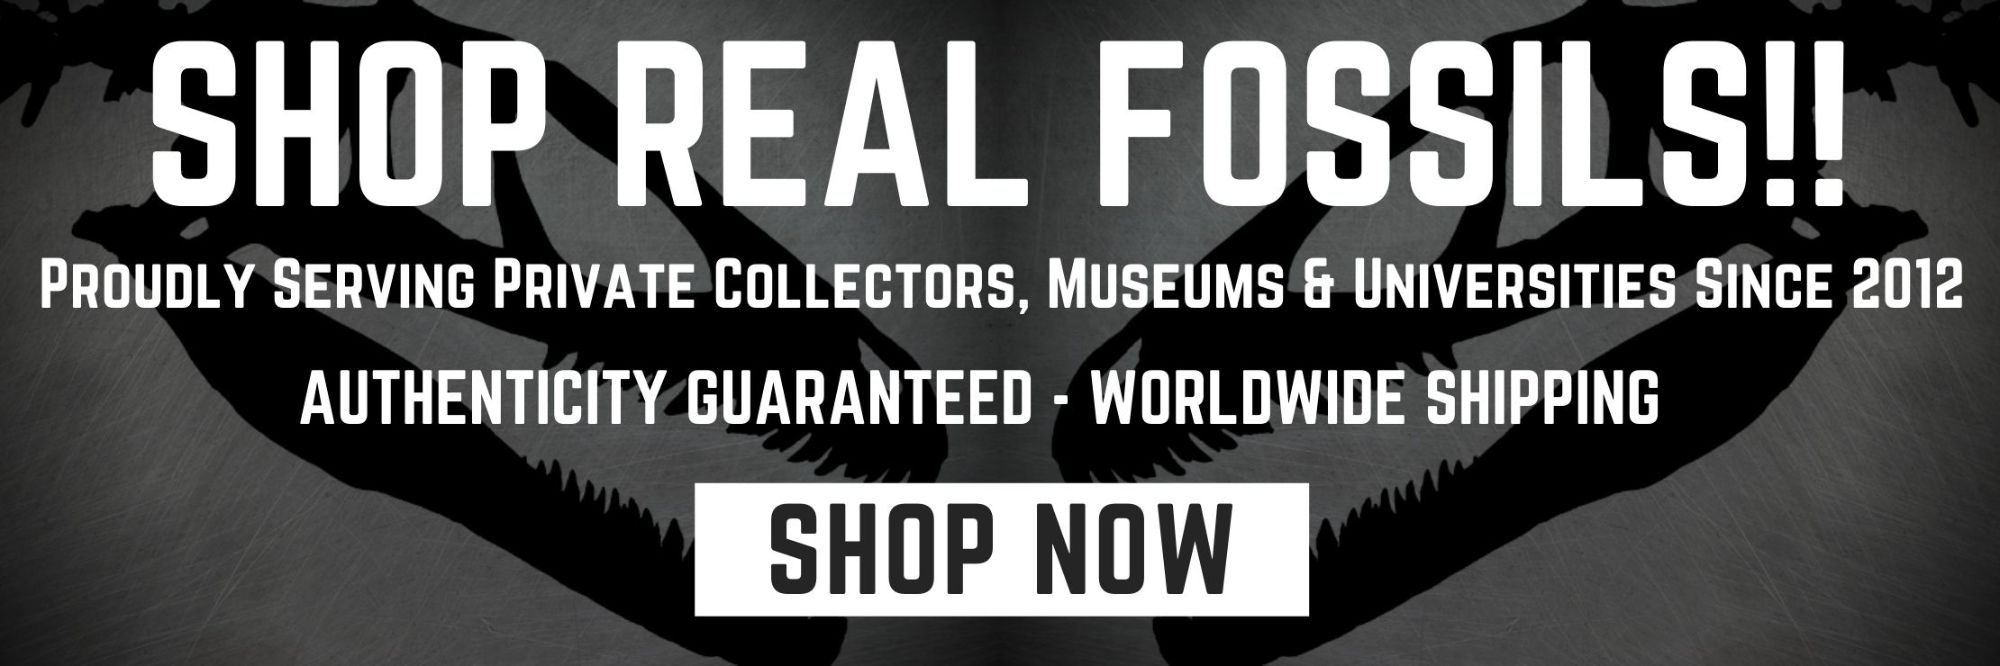 Click here to Shop Real Fossils at dino fossils uk